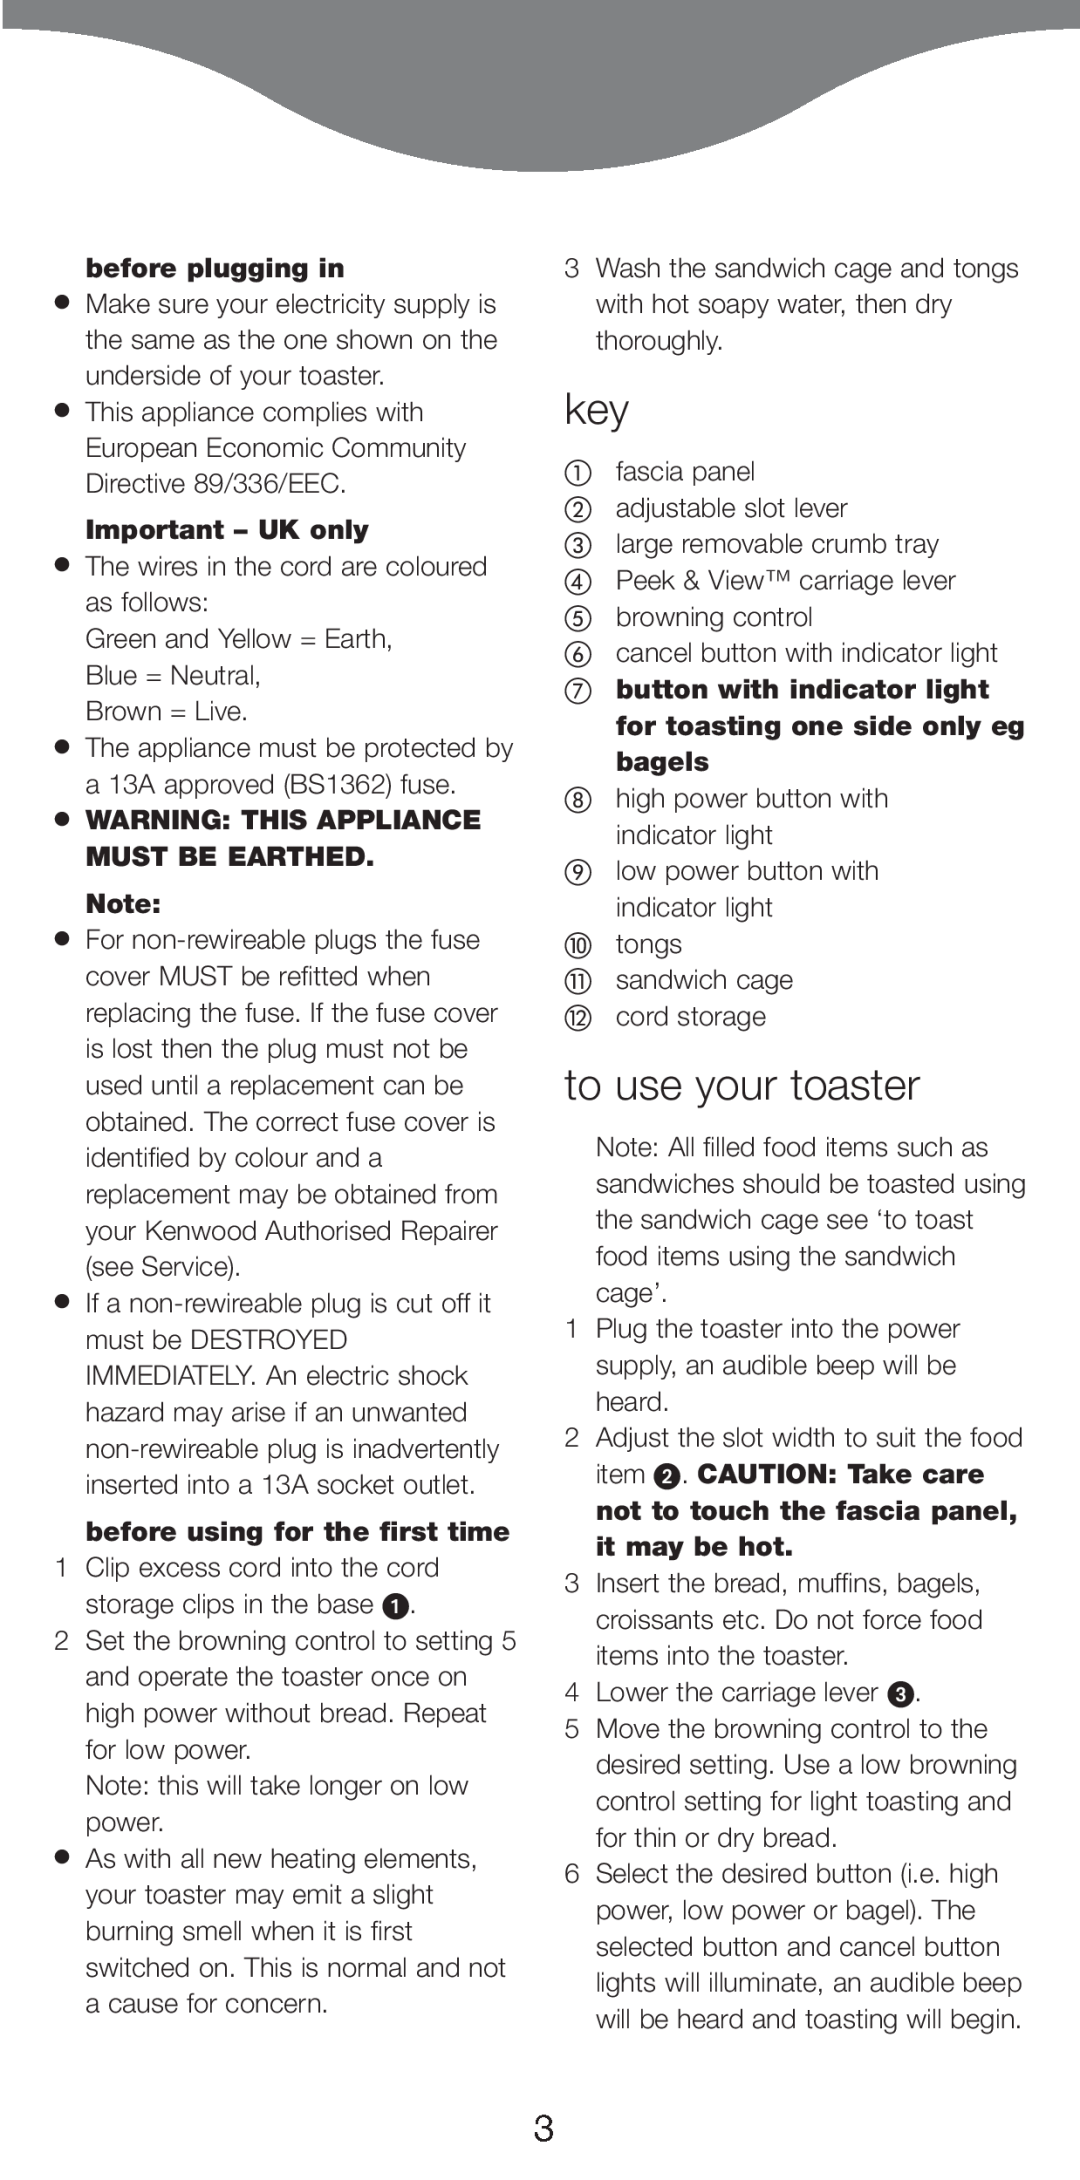 Kenwood TTM310 manual to use your toaster, before plugging in, Important - UK only, Warning This Appliance Must Be Earthed 